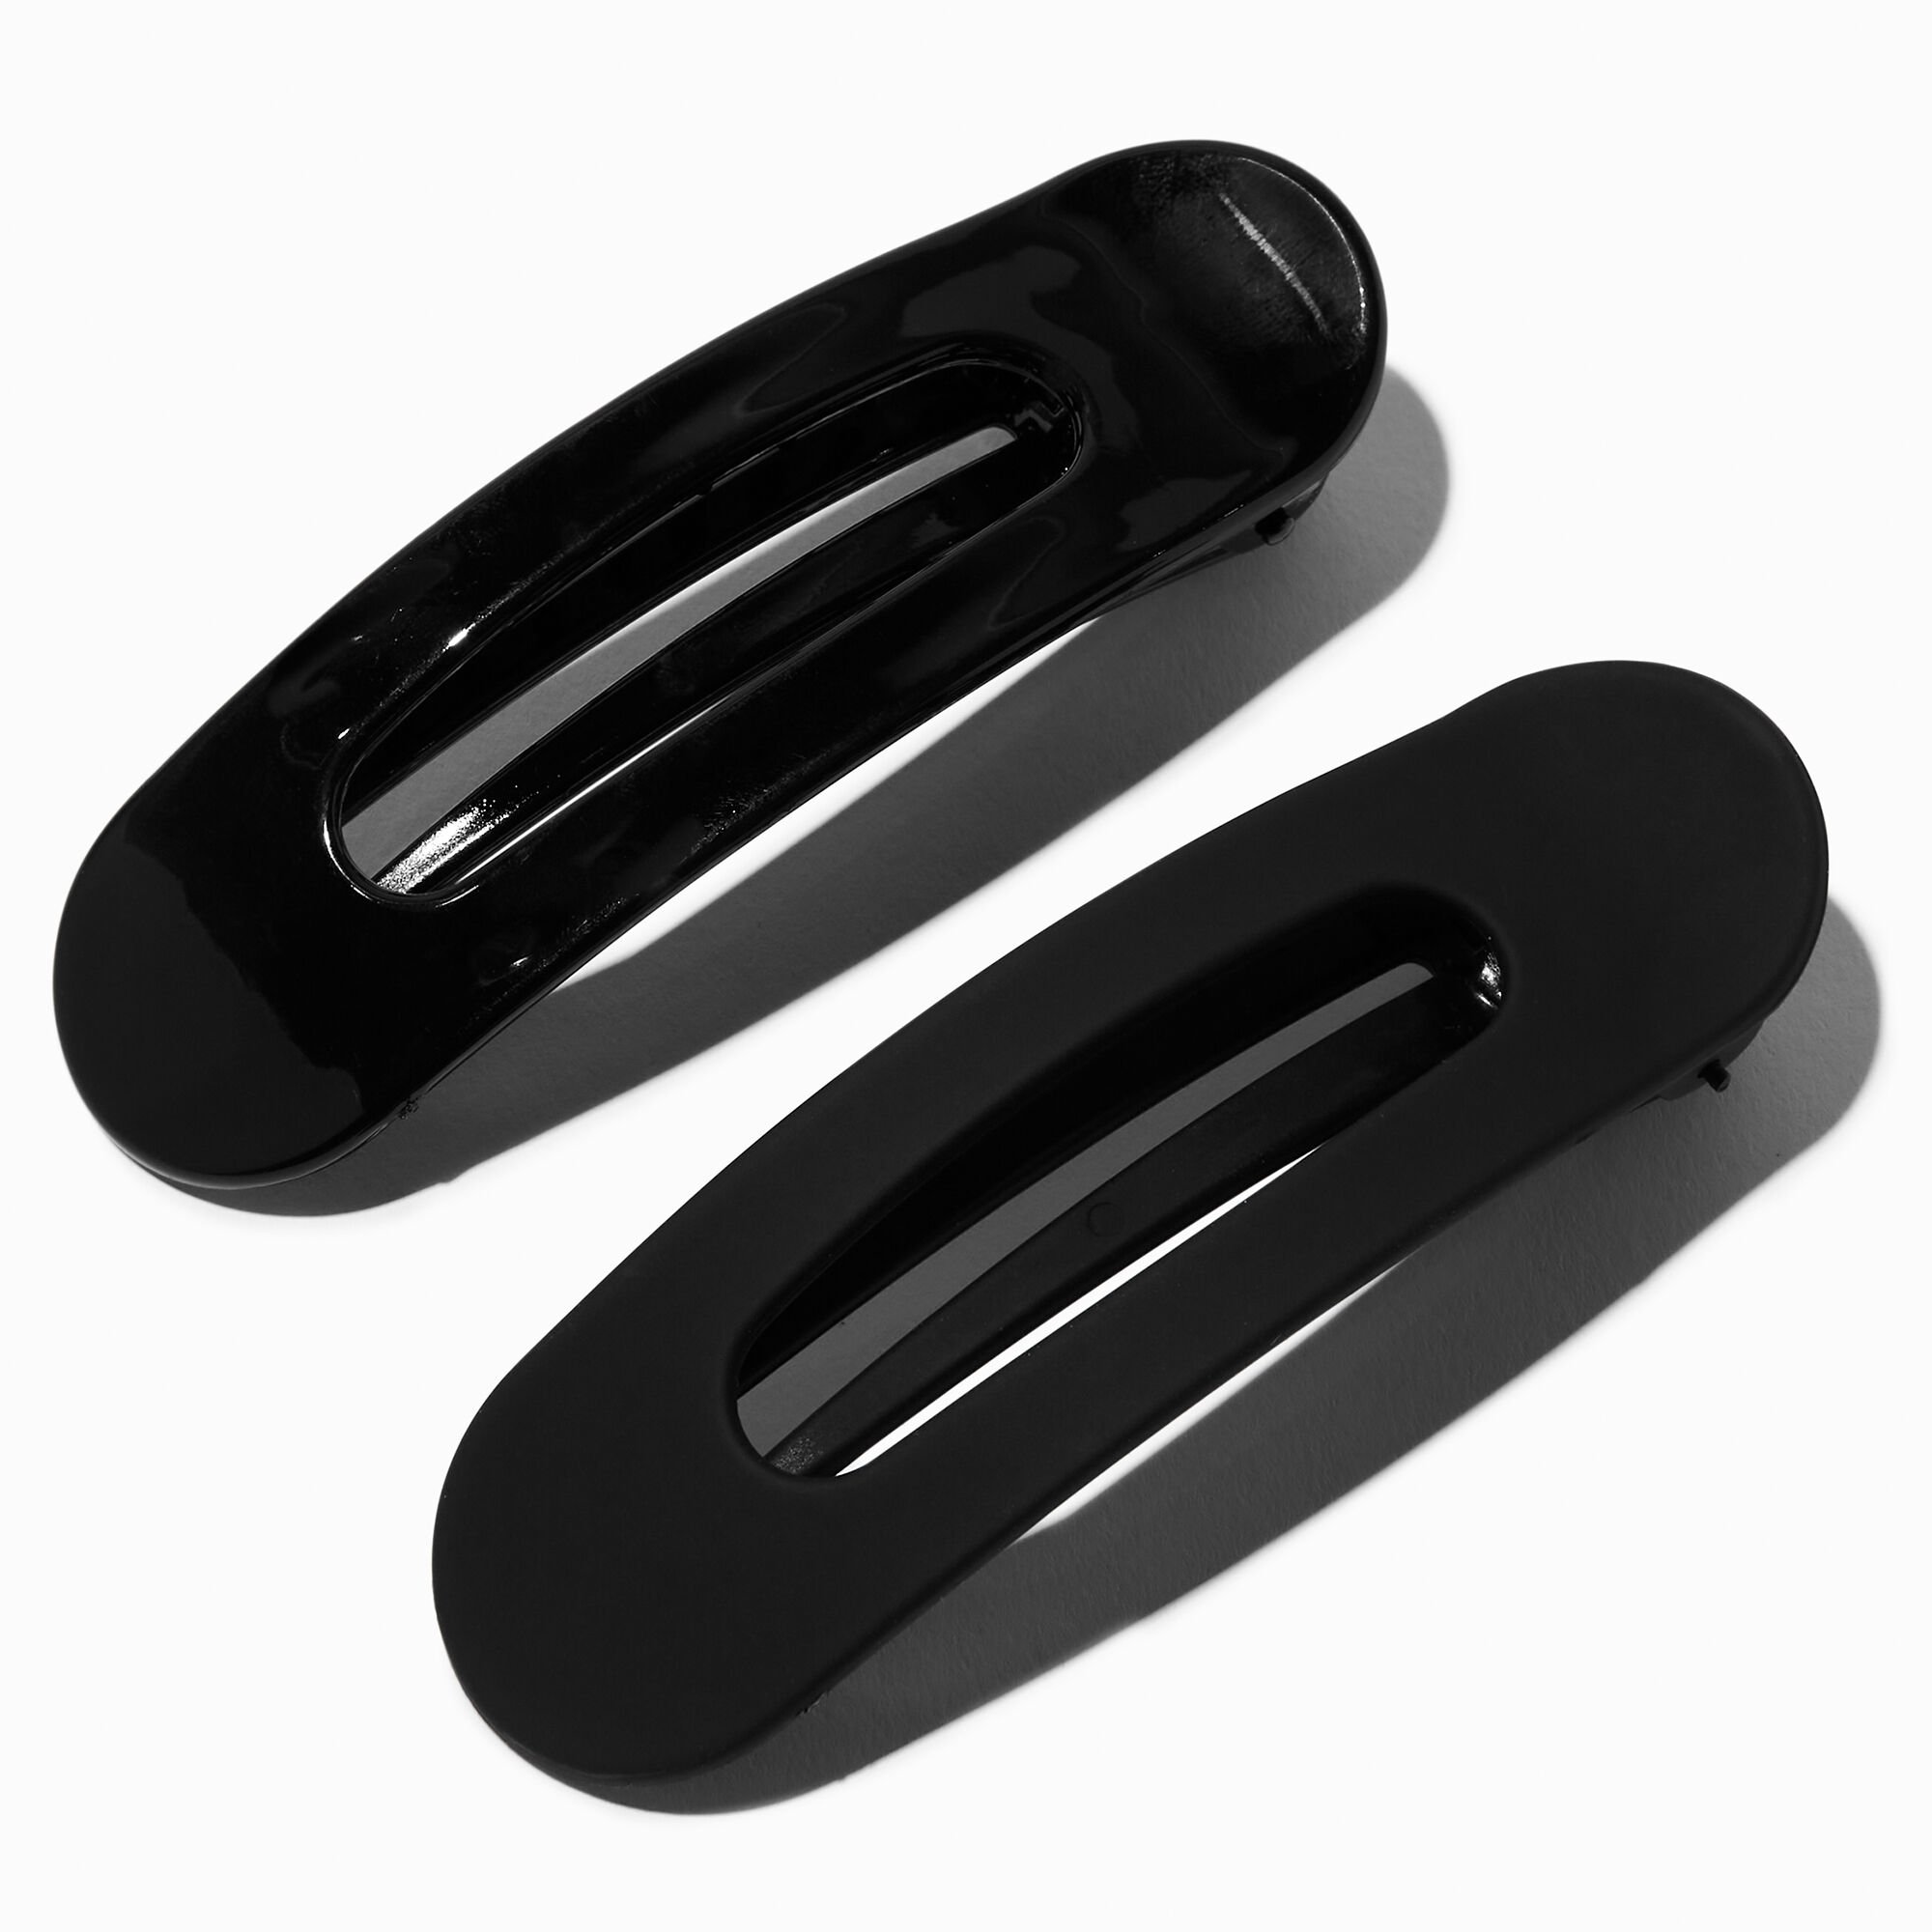 View Claires Shiny Matte Hair Clips Black information